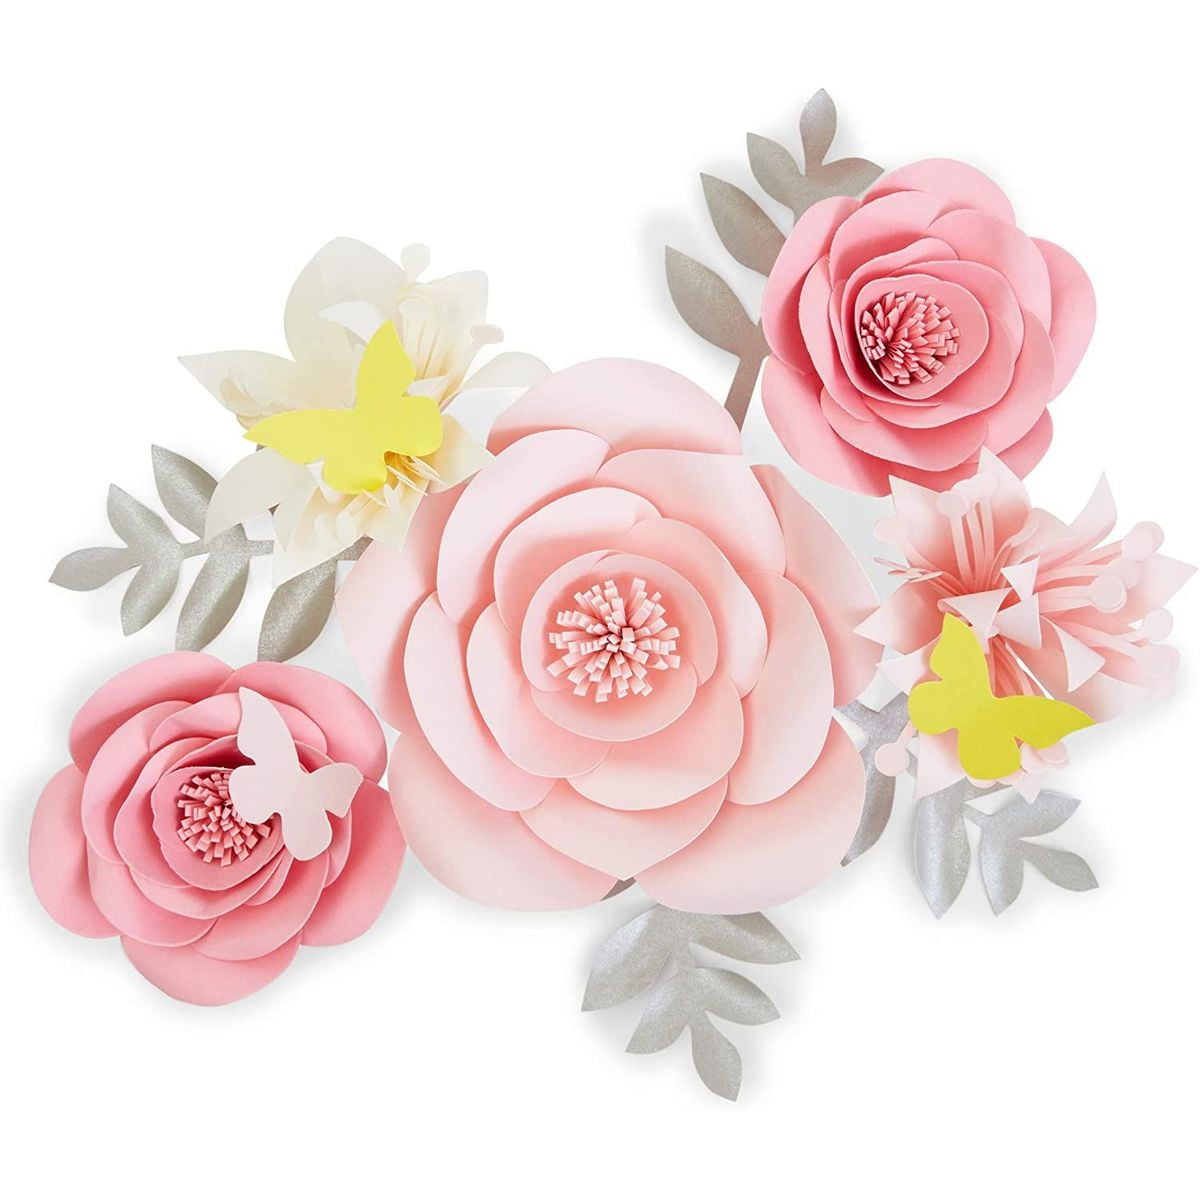 Weddings and Showers decoration Backdrops Sale Price Set of 20 Paper Flowers 7-2 for Wall D\u00e9cor